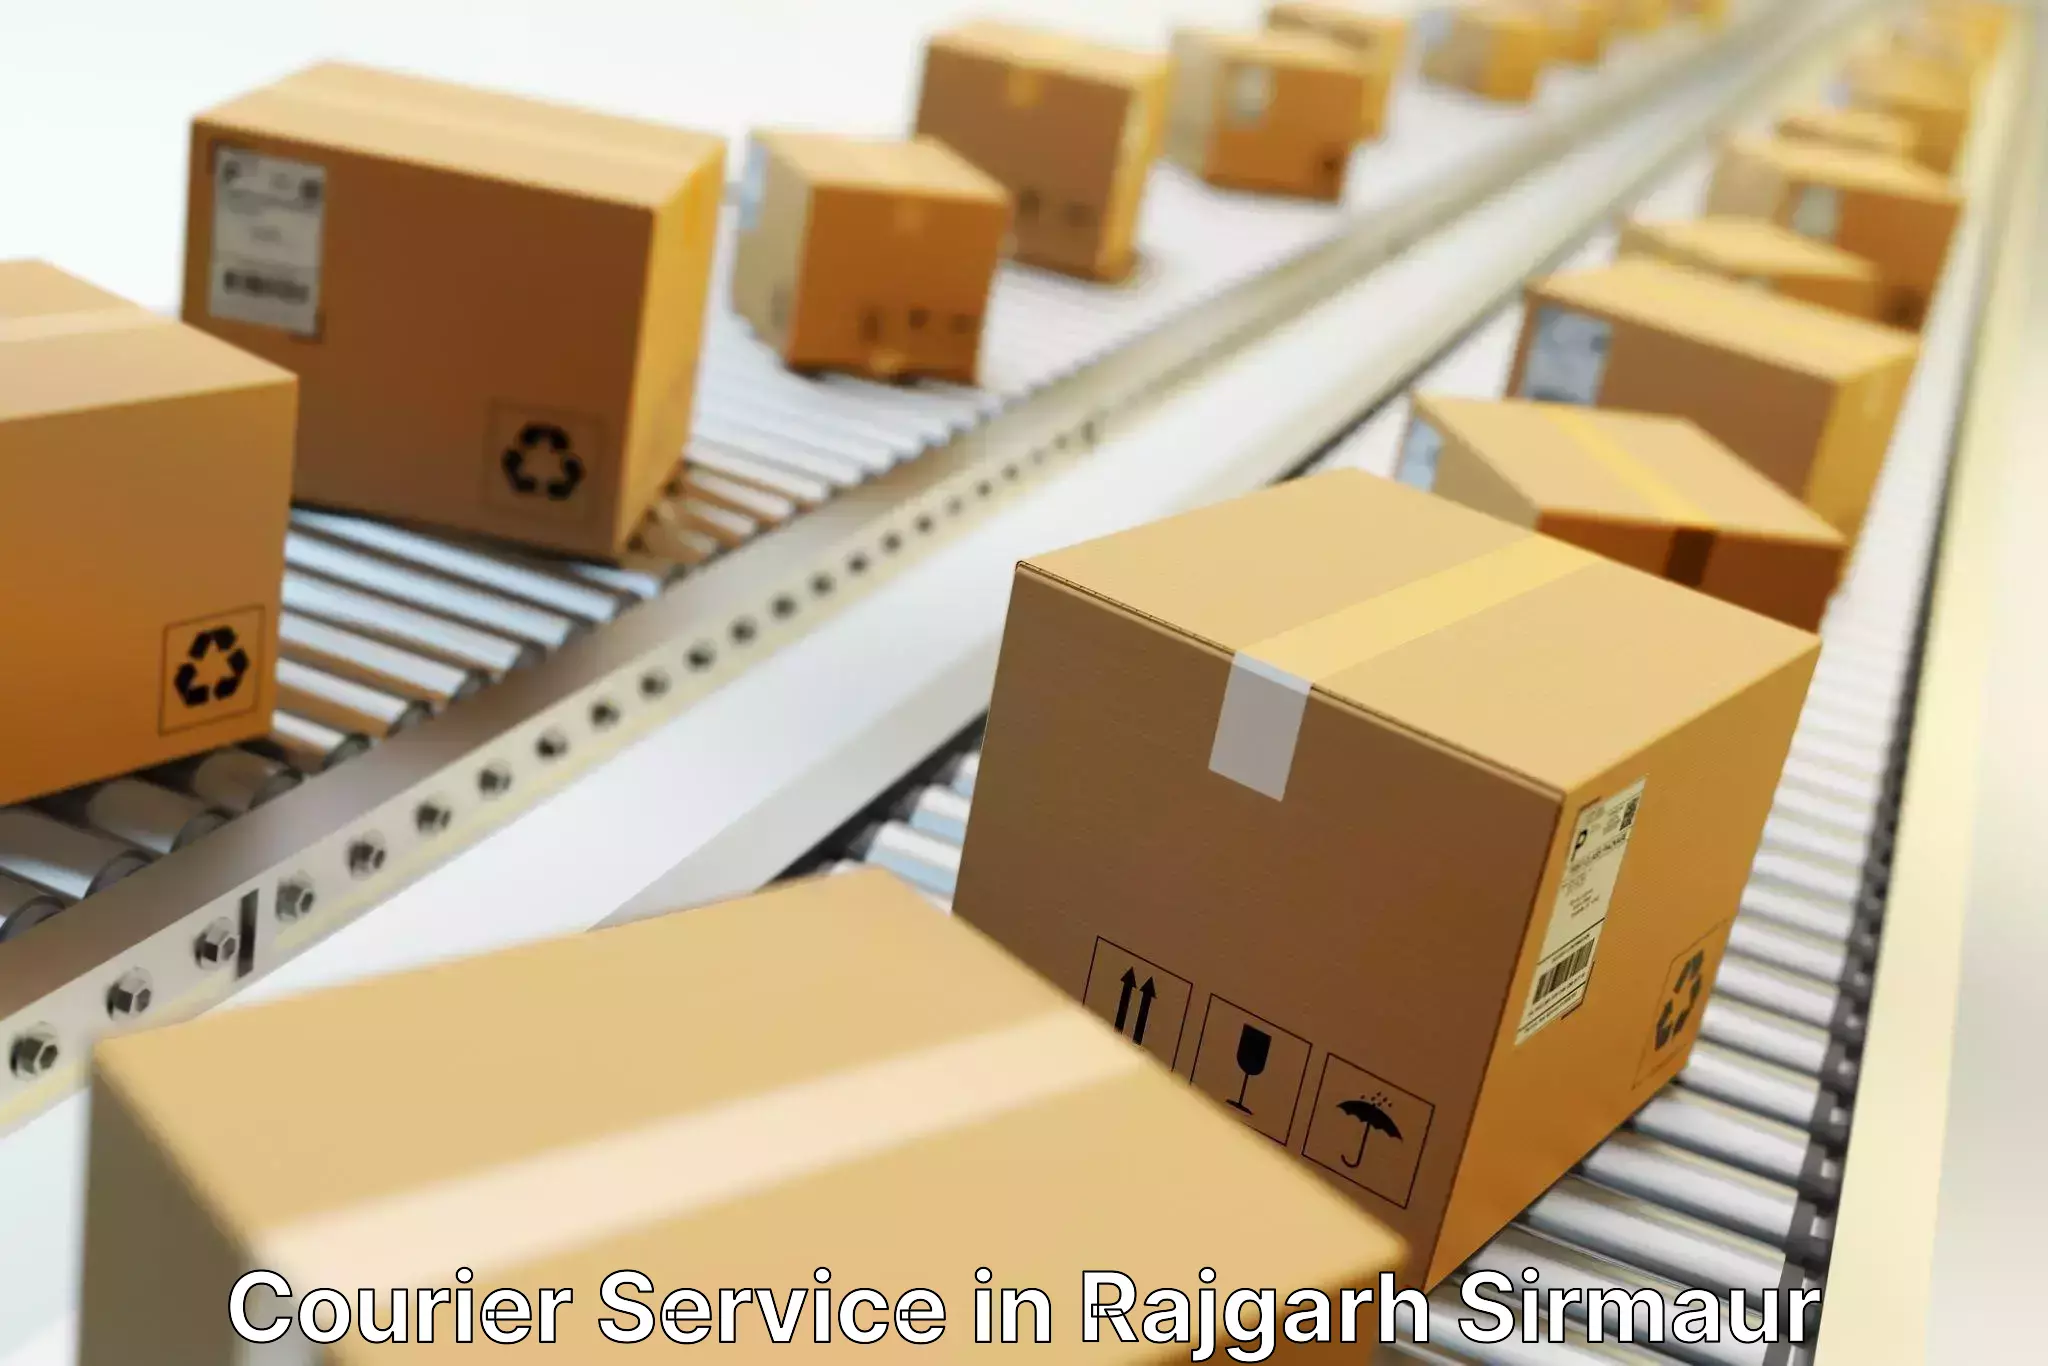 Tailored shipping services in Rajgarh Sirmaur